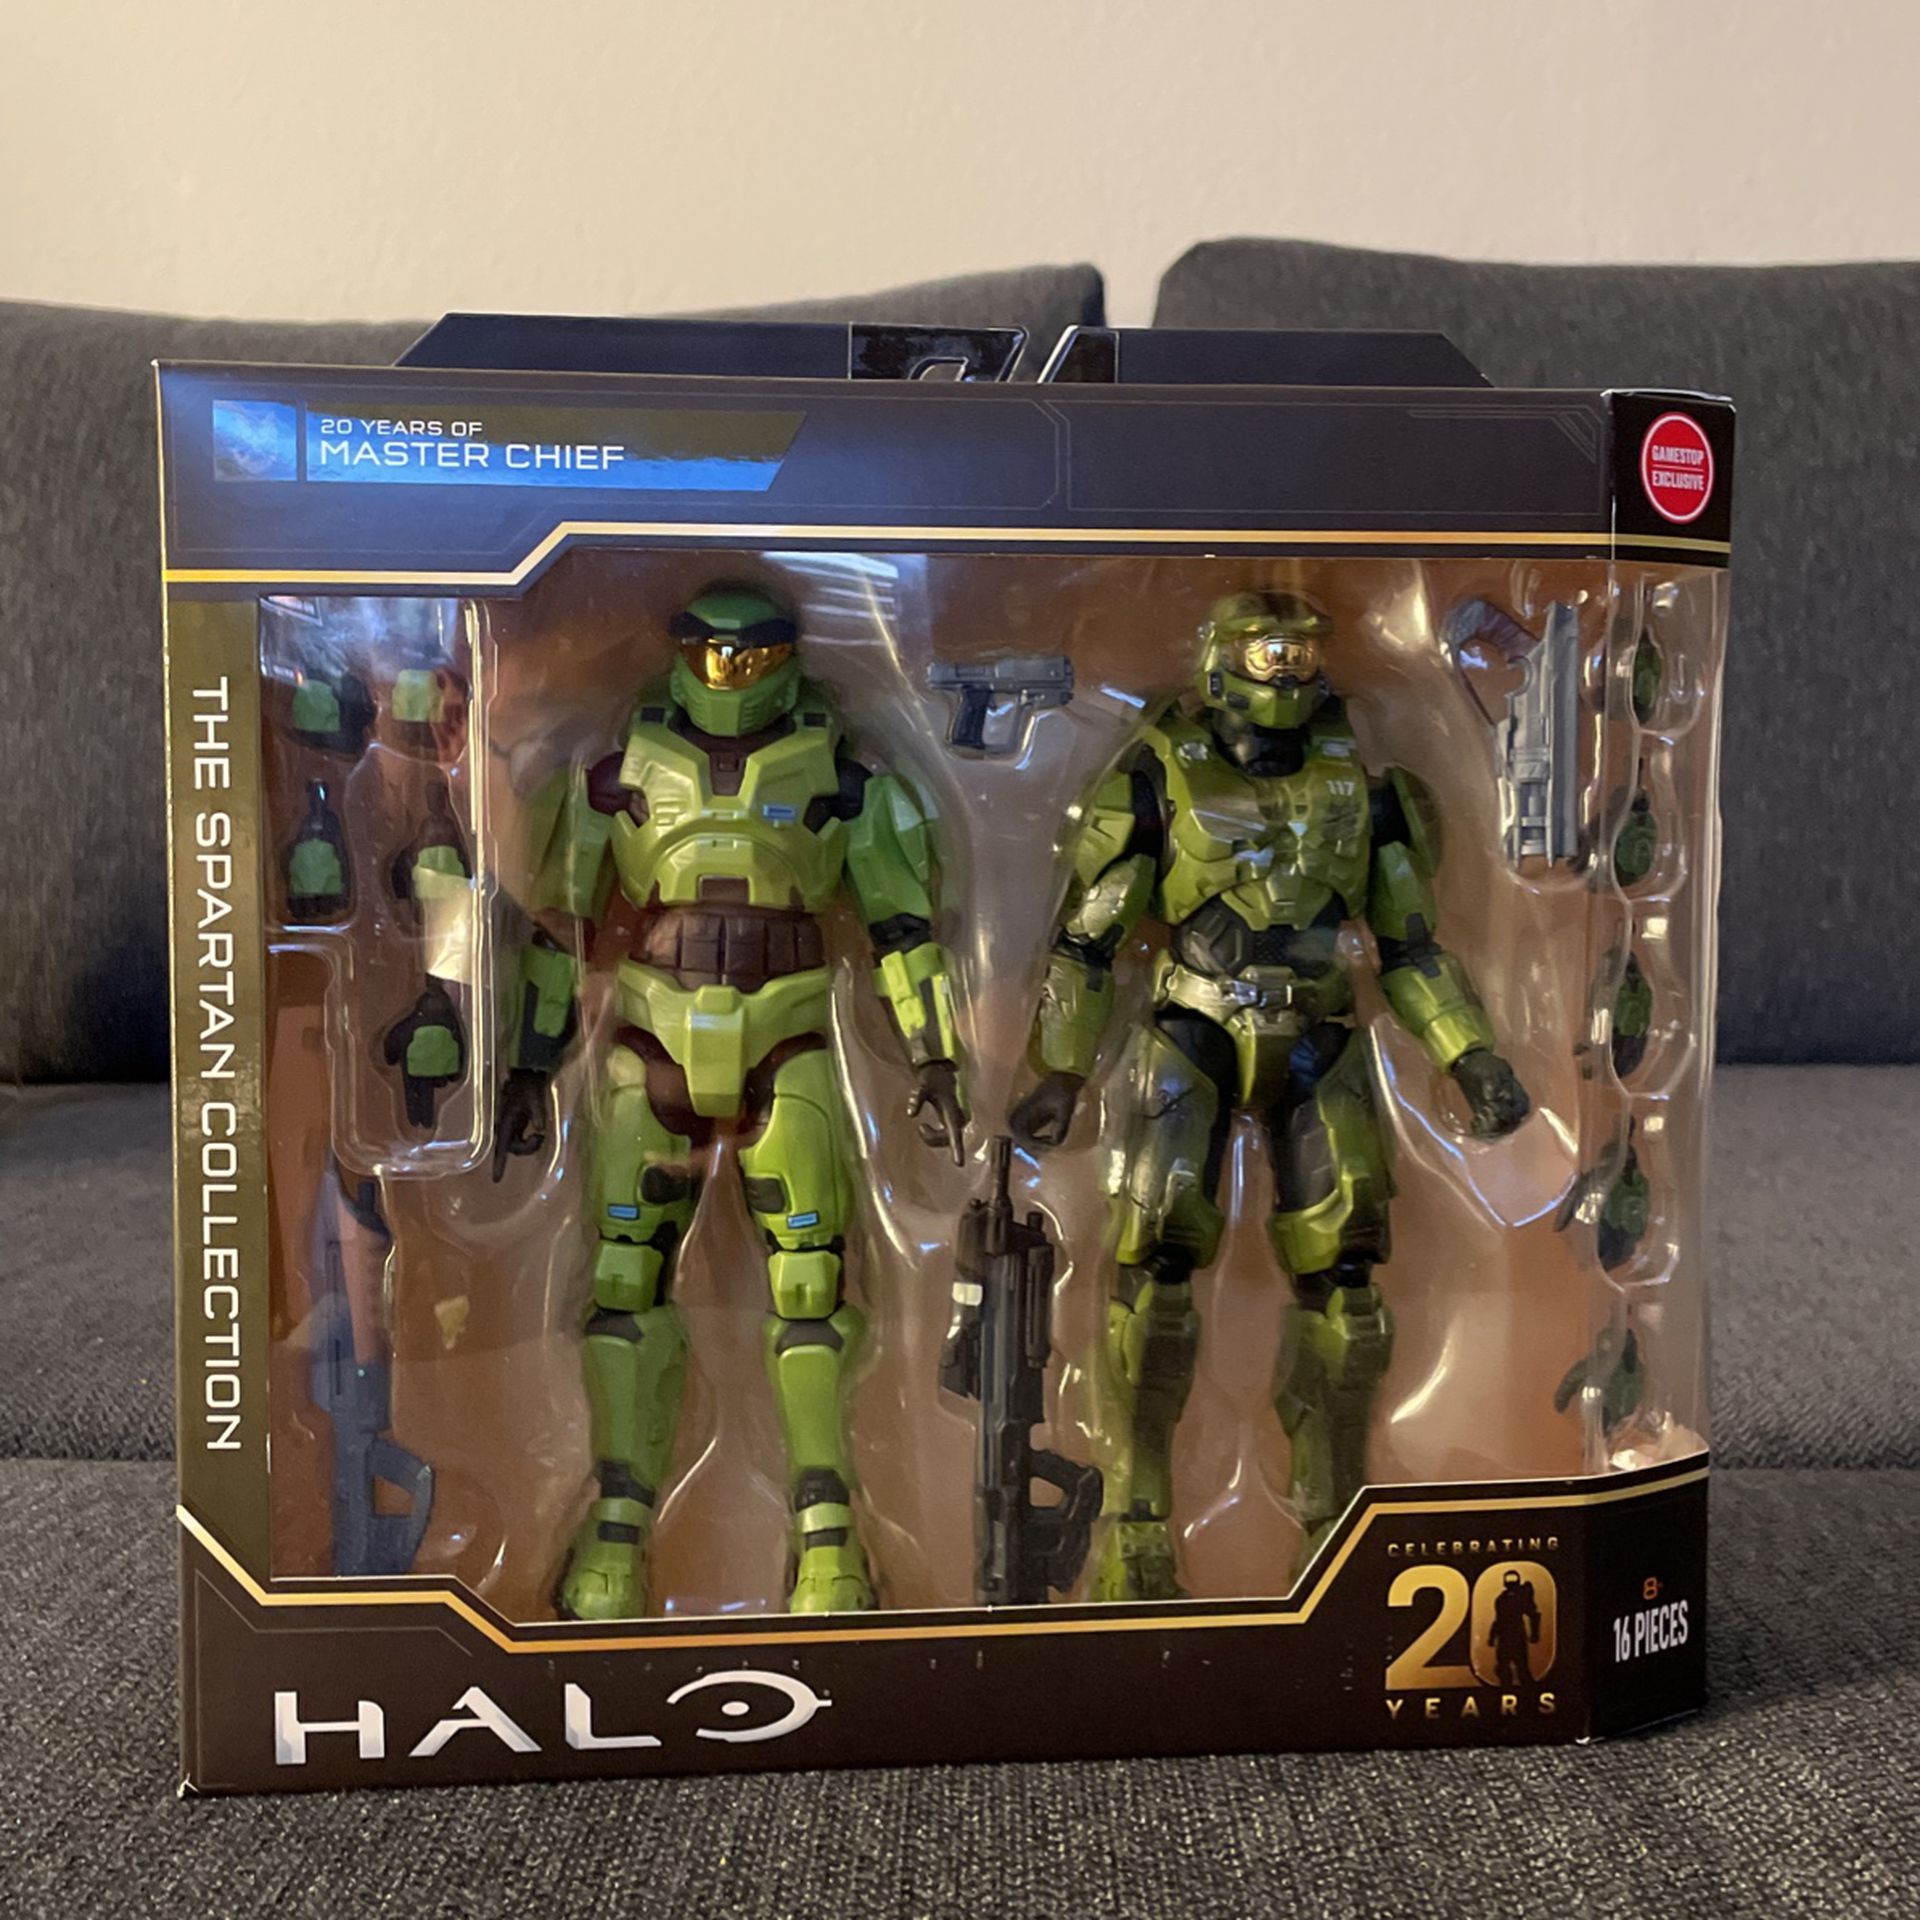 Celebrating 20 Years of Halo in The Master Chief Collection